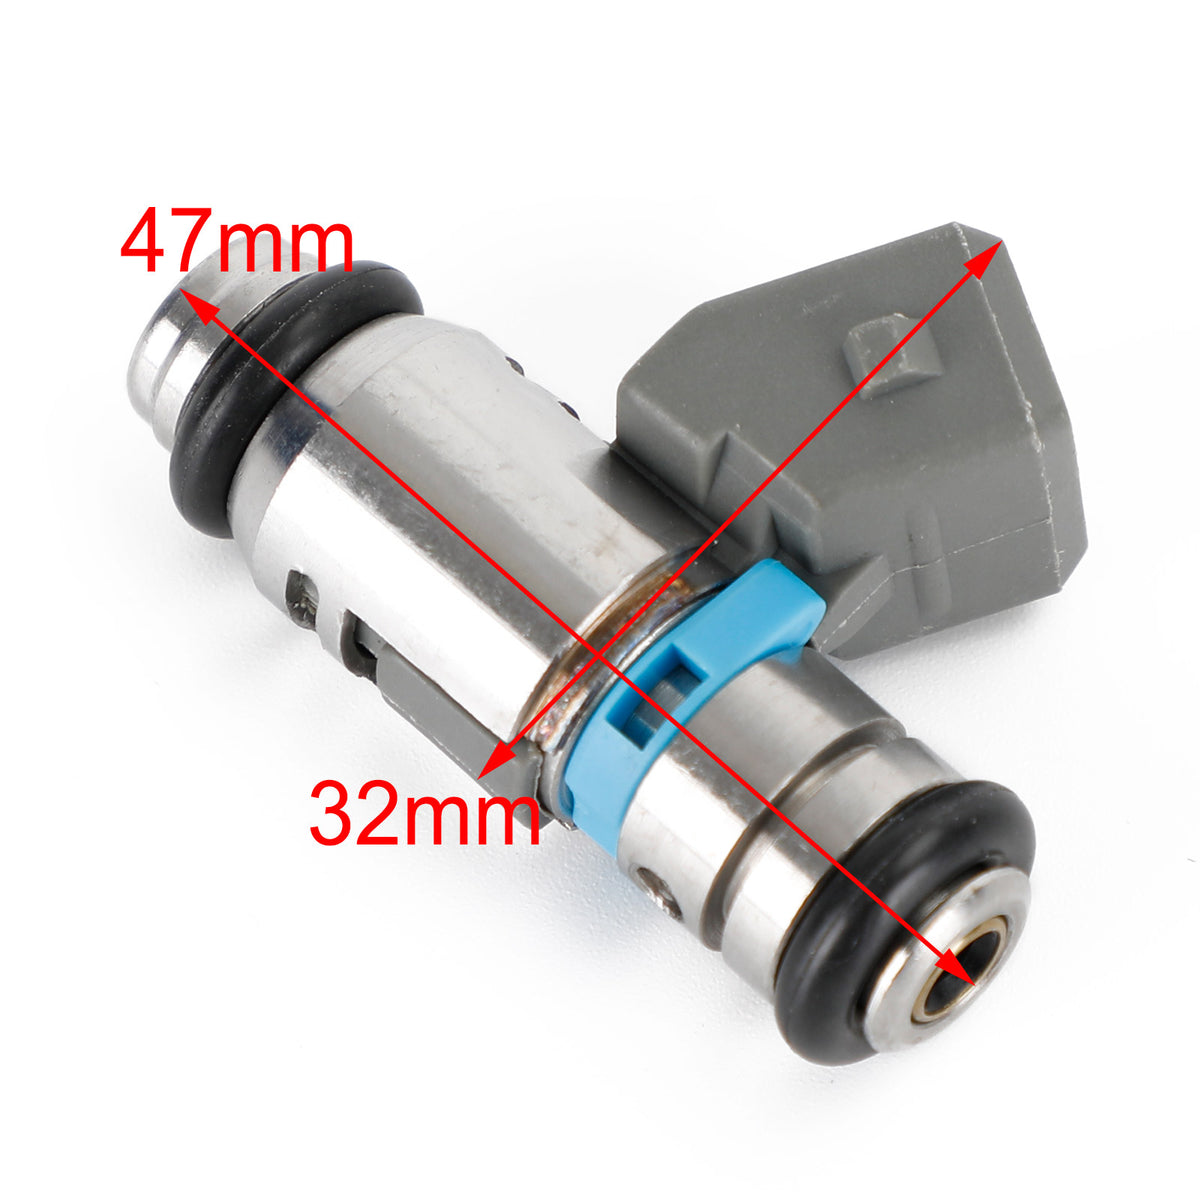 IWP-181 Twin Power 3.8 g/s Fuel Injector Direct For Repl 27706-07/A Generic